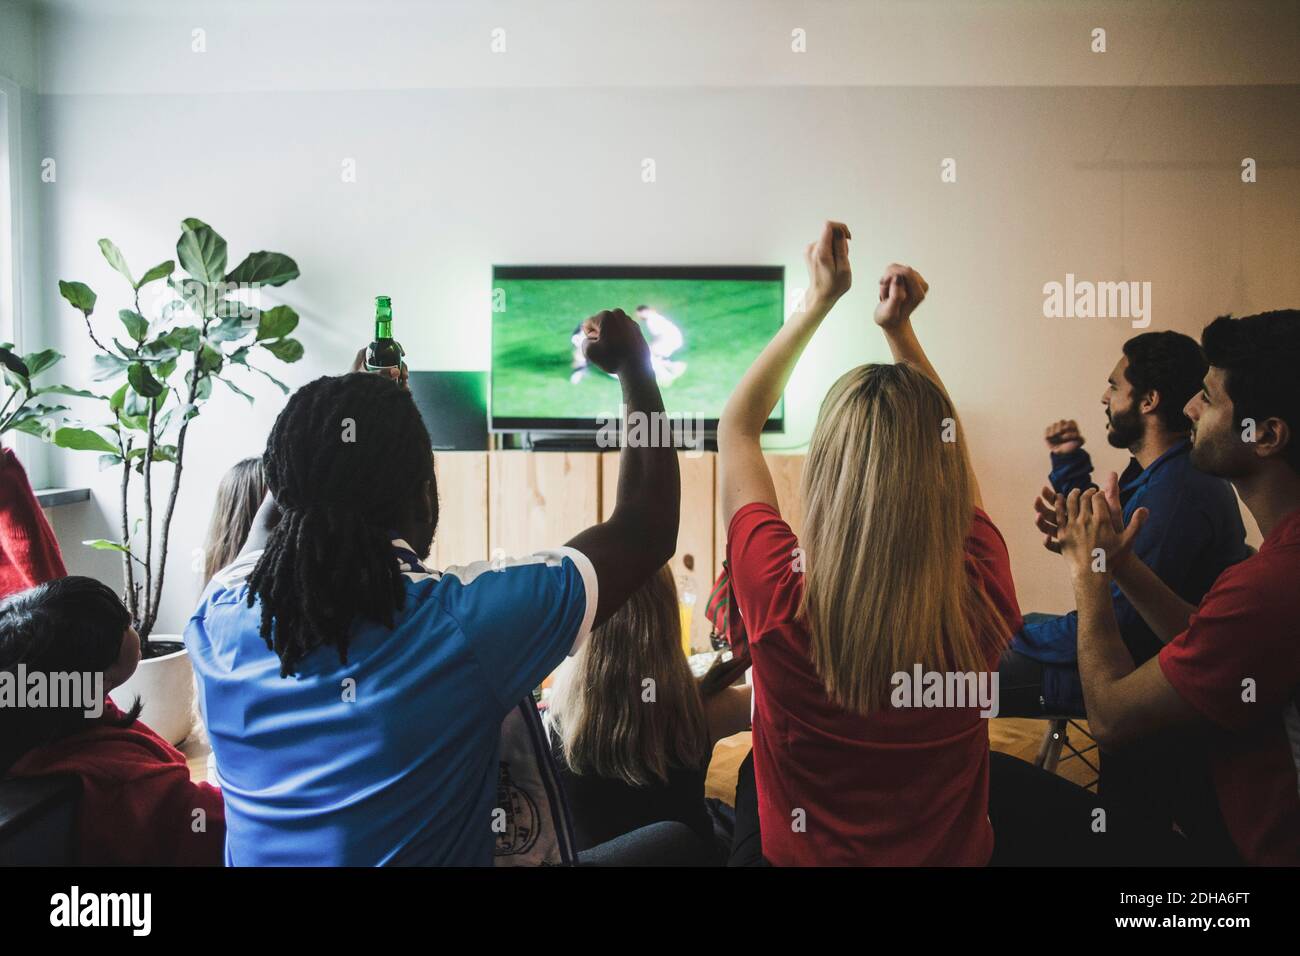 Cheerful friends with arms raised watching soccer match in living room Stock Photo